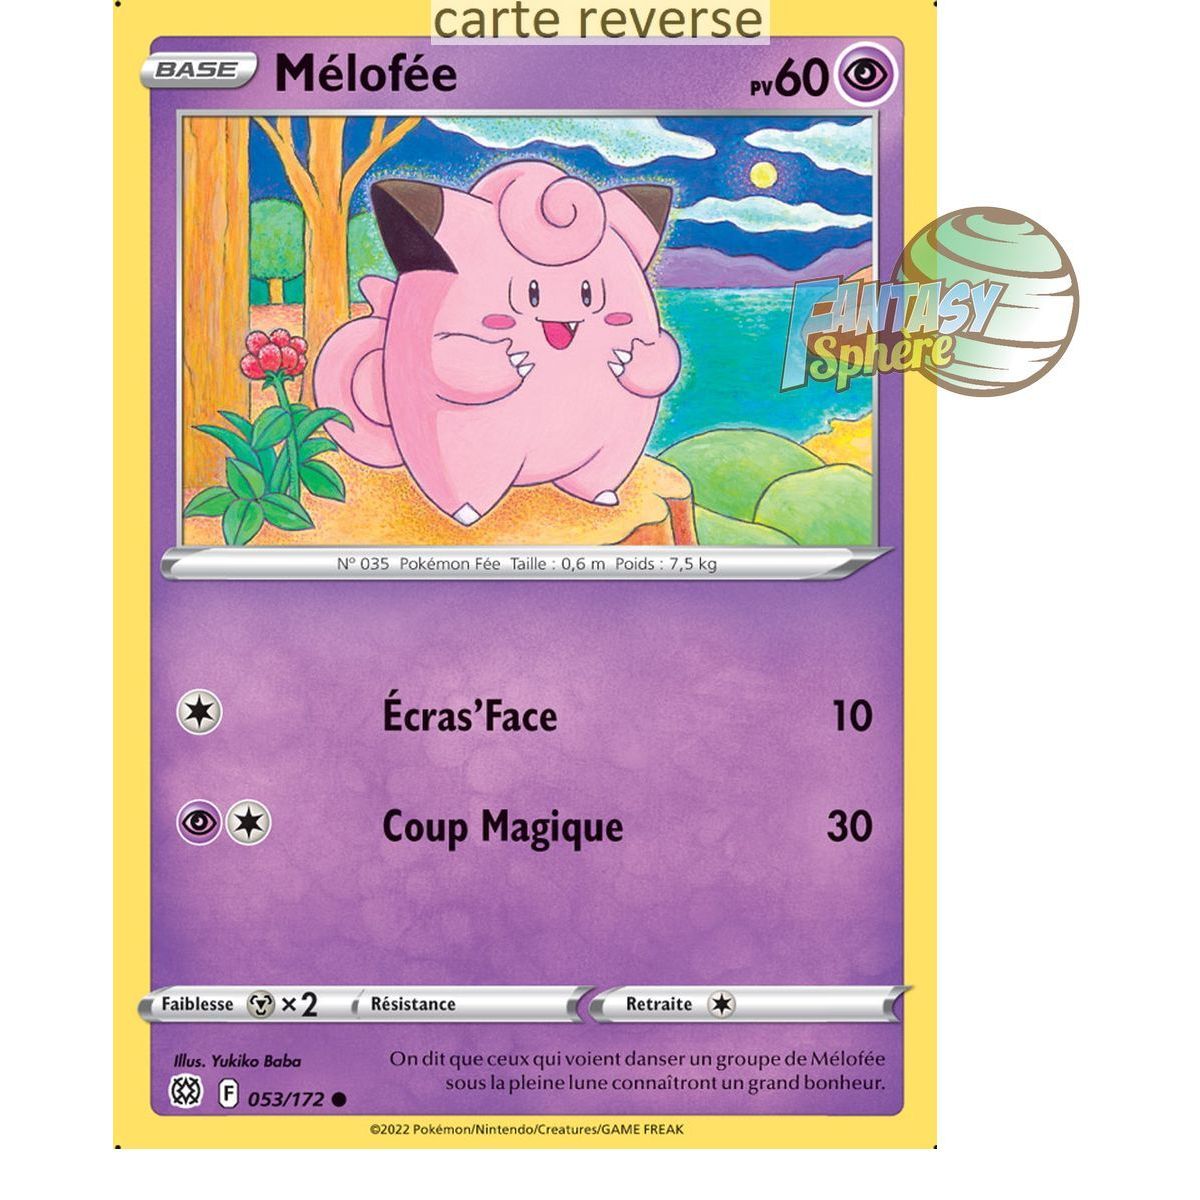 Clefairy - Reverse 53/172 - Sword and Shield 9 Sparkling Stars